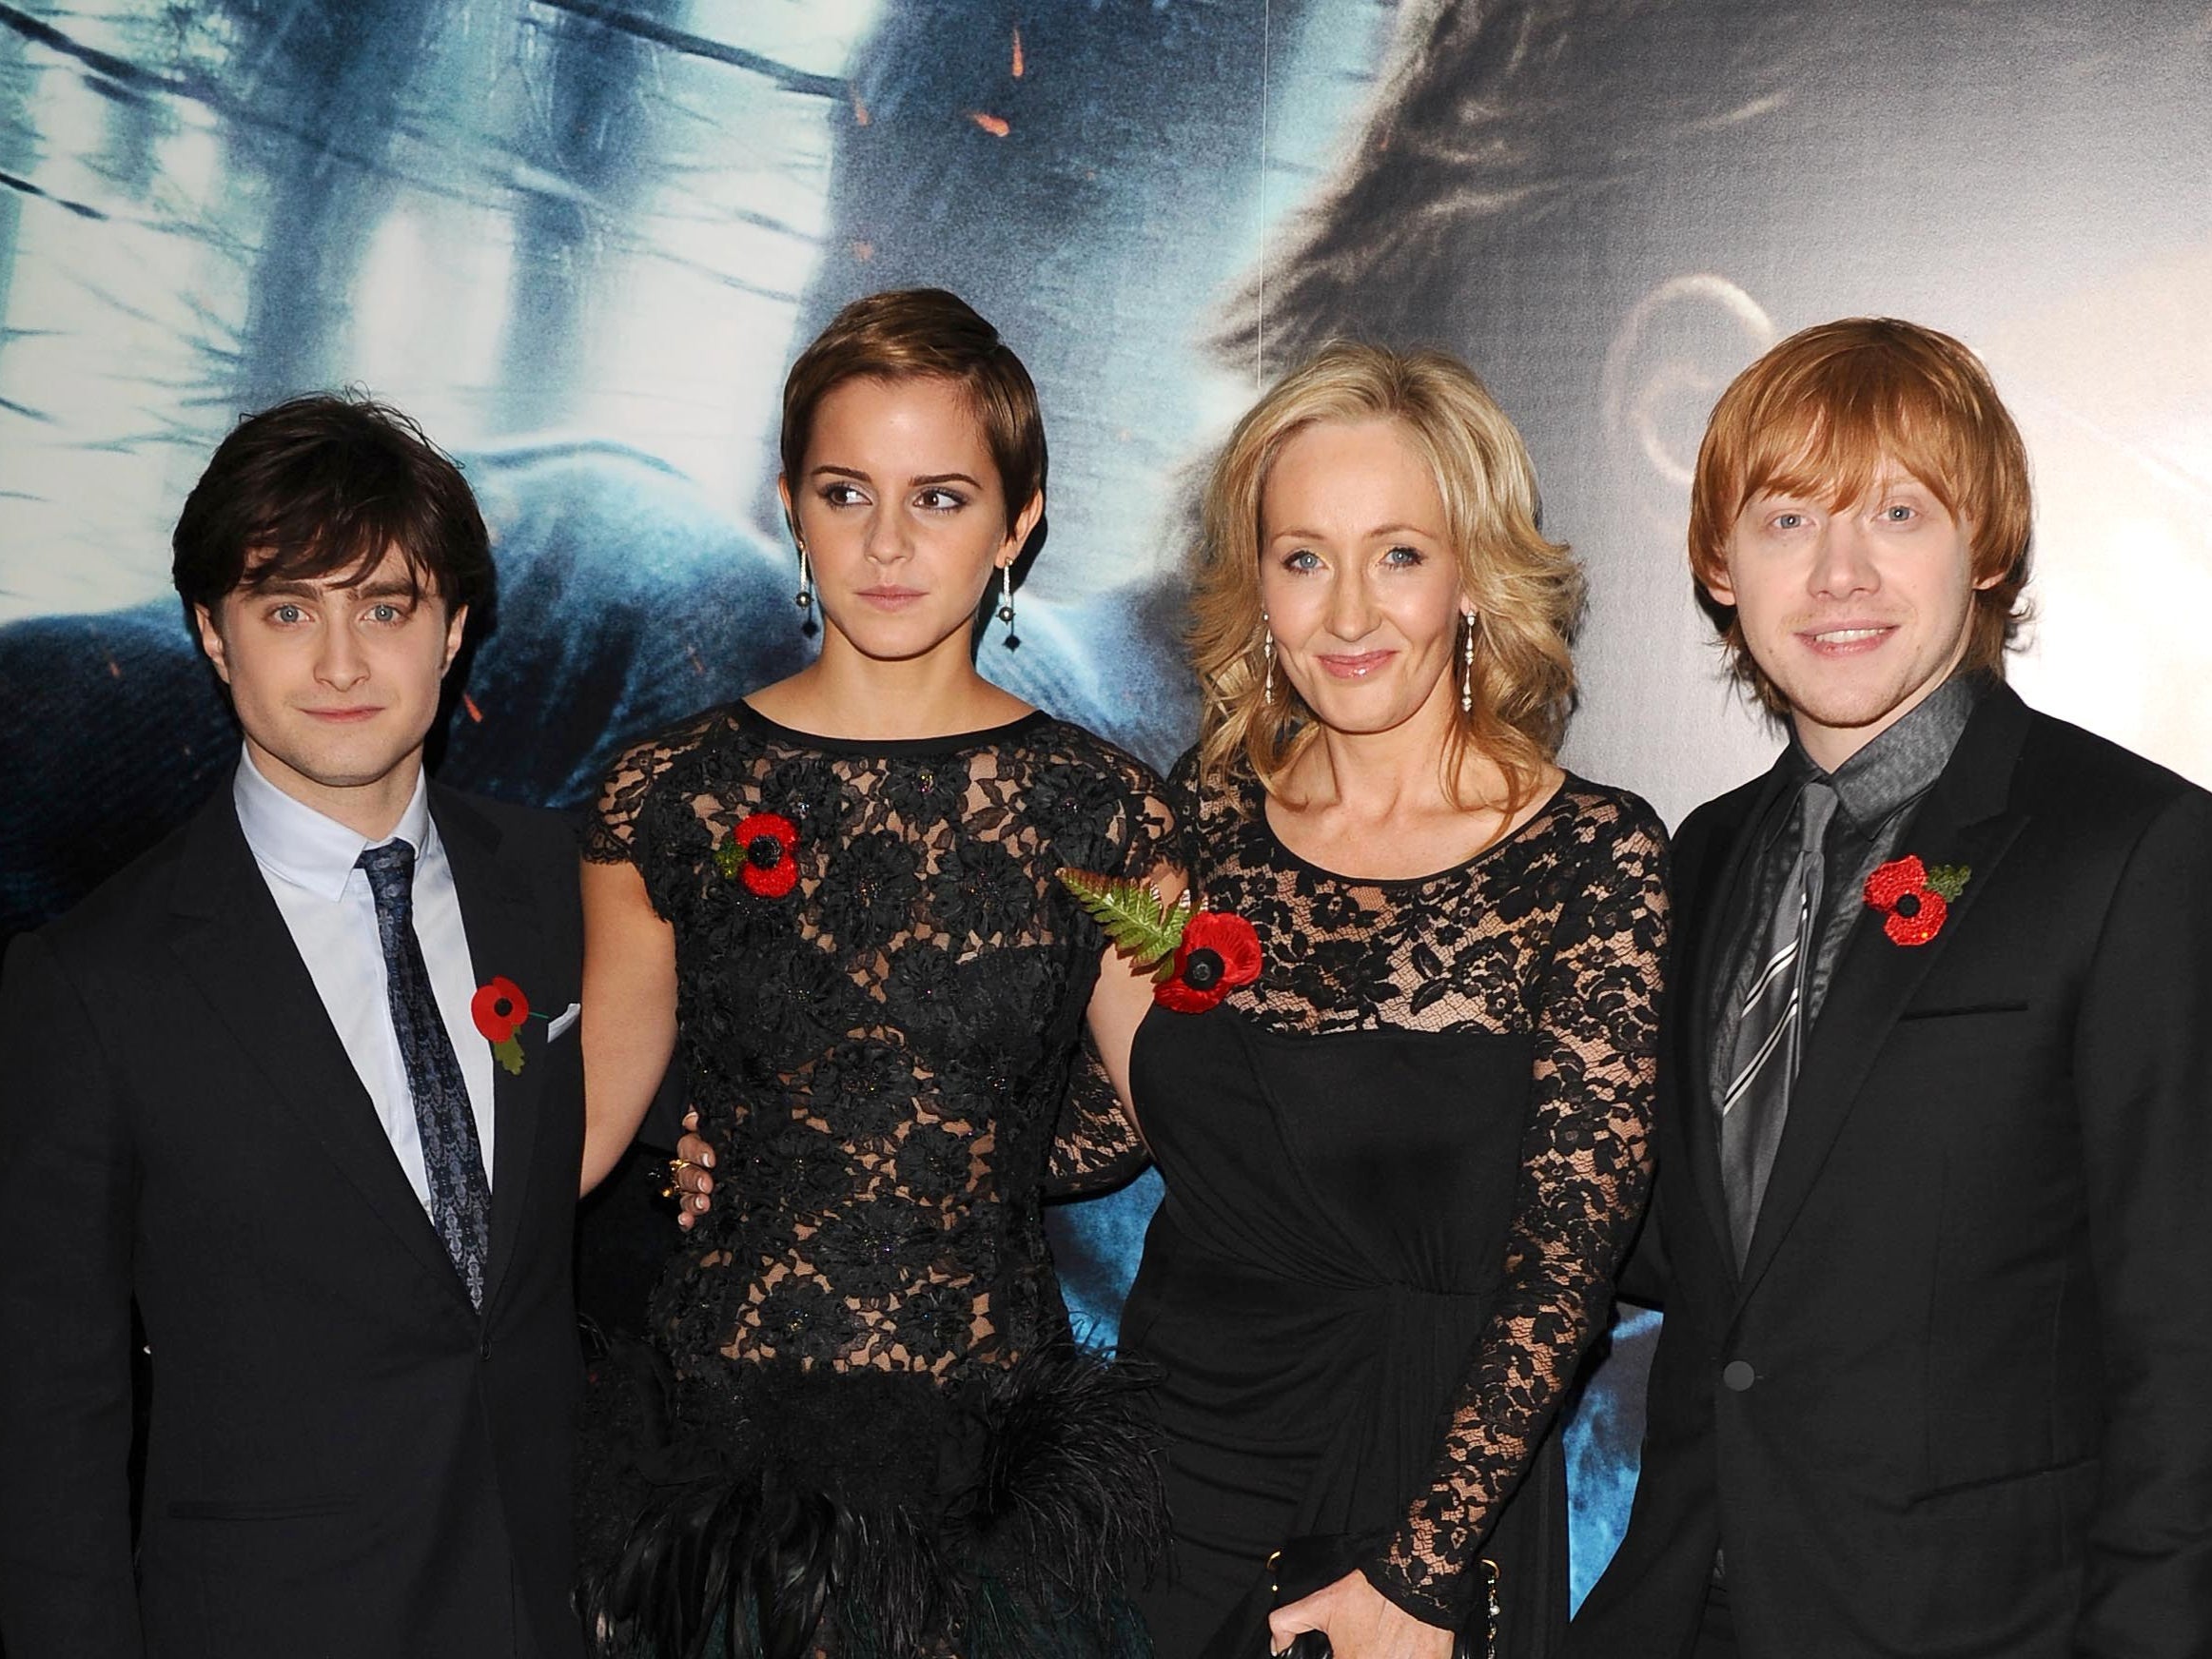 The author said she’d never ‘forgive’ the Harry Potter actors who disagreed with her